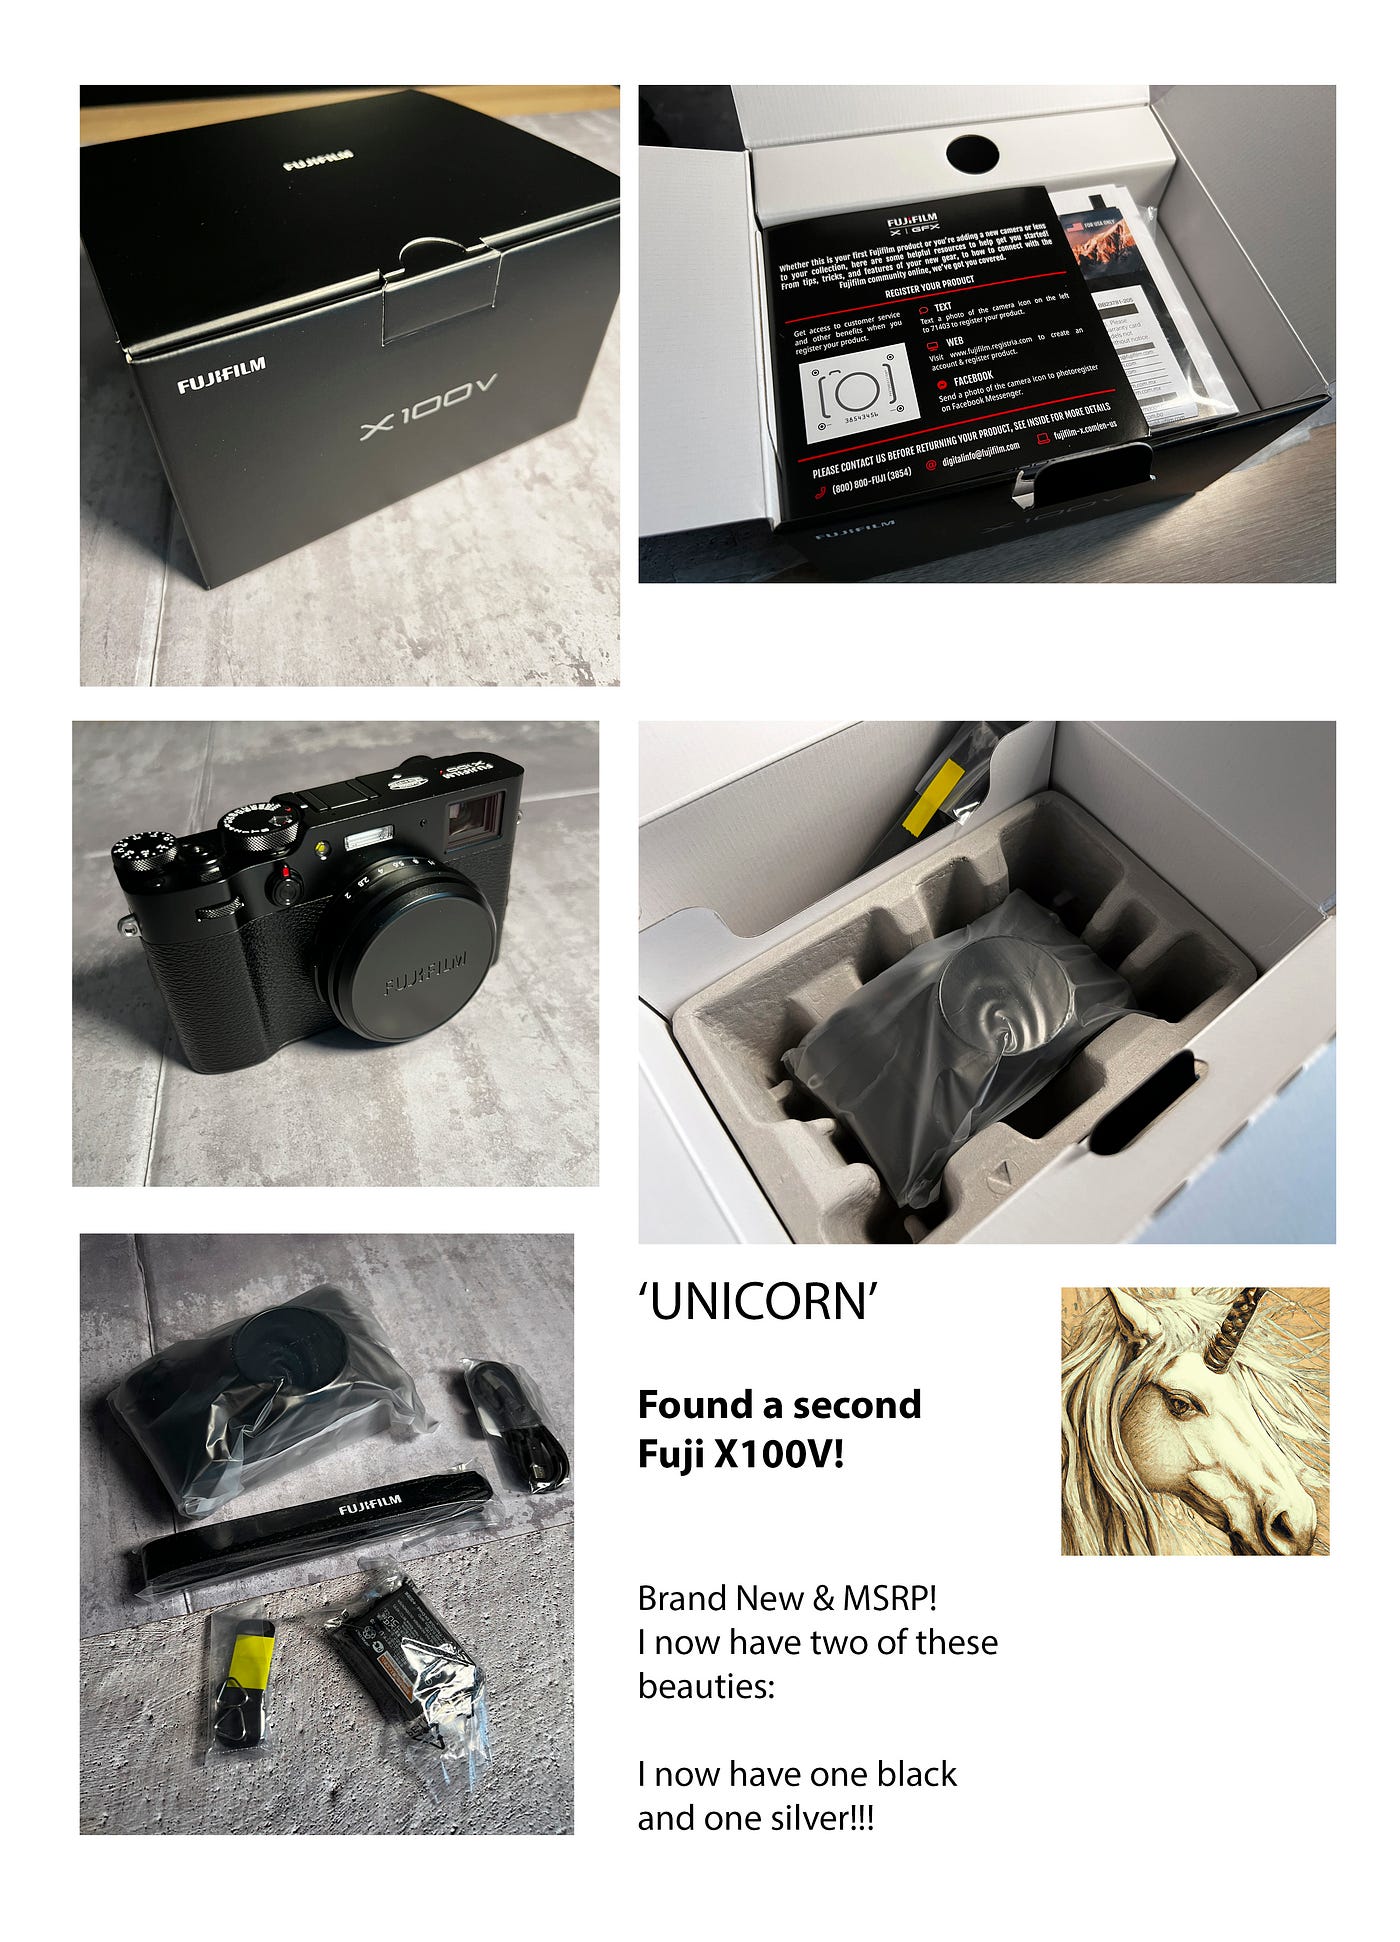 How To Find A Unicorn: The Fuji X100V At MSRP | by TOYPHOTOGRAPHS | Medium